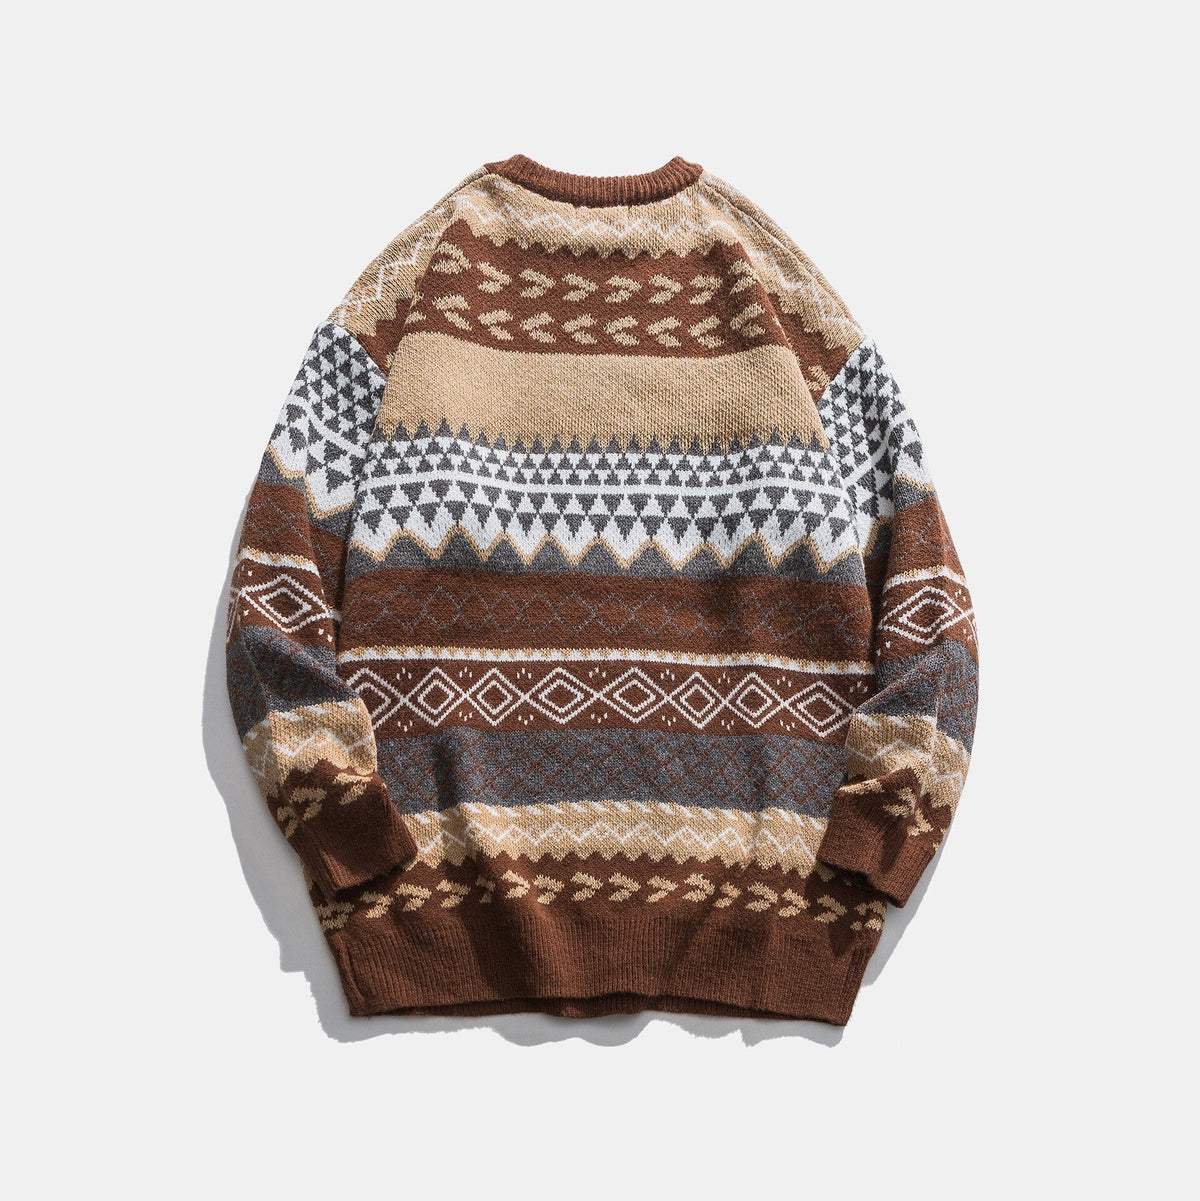 Apricot Harvest Aztec Cotton Men's Sweater | Hypoallergenic - Allergy Friendly - Naturally Free